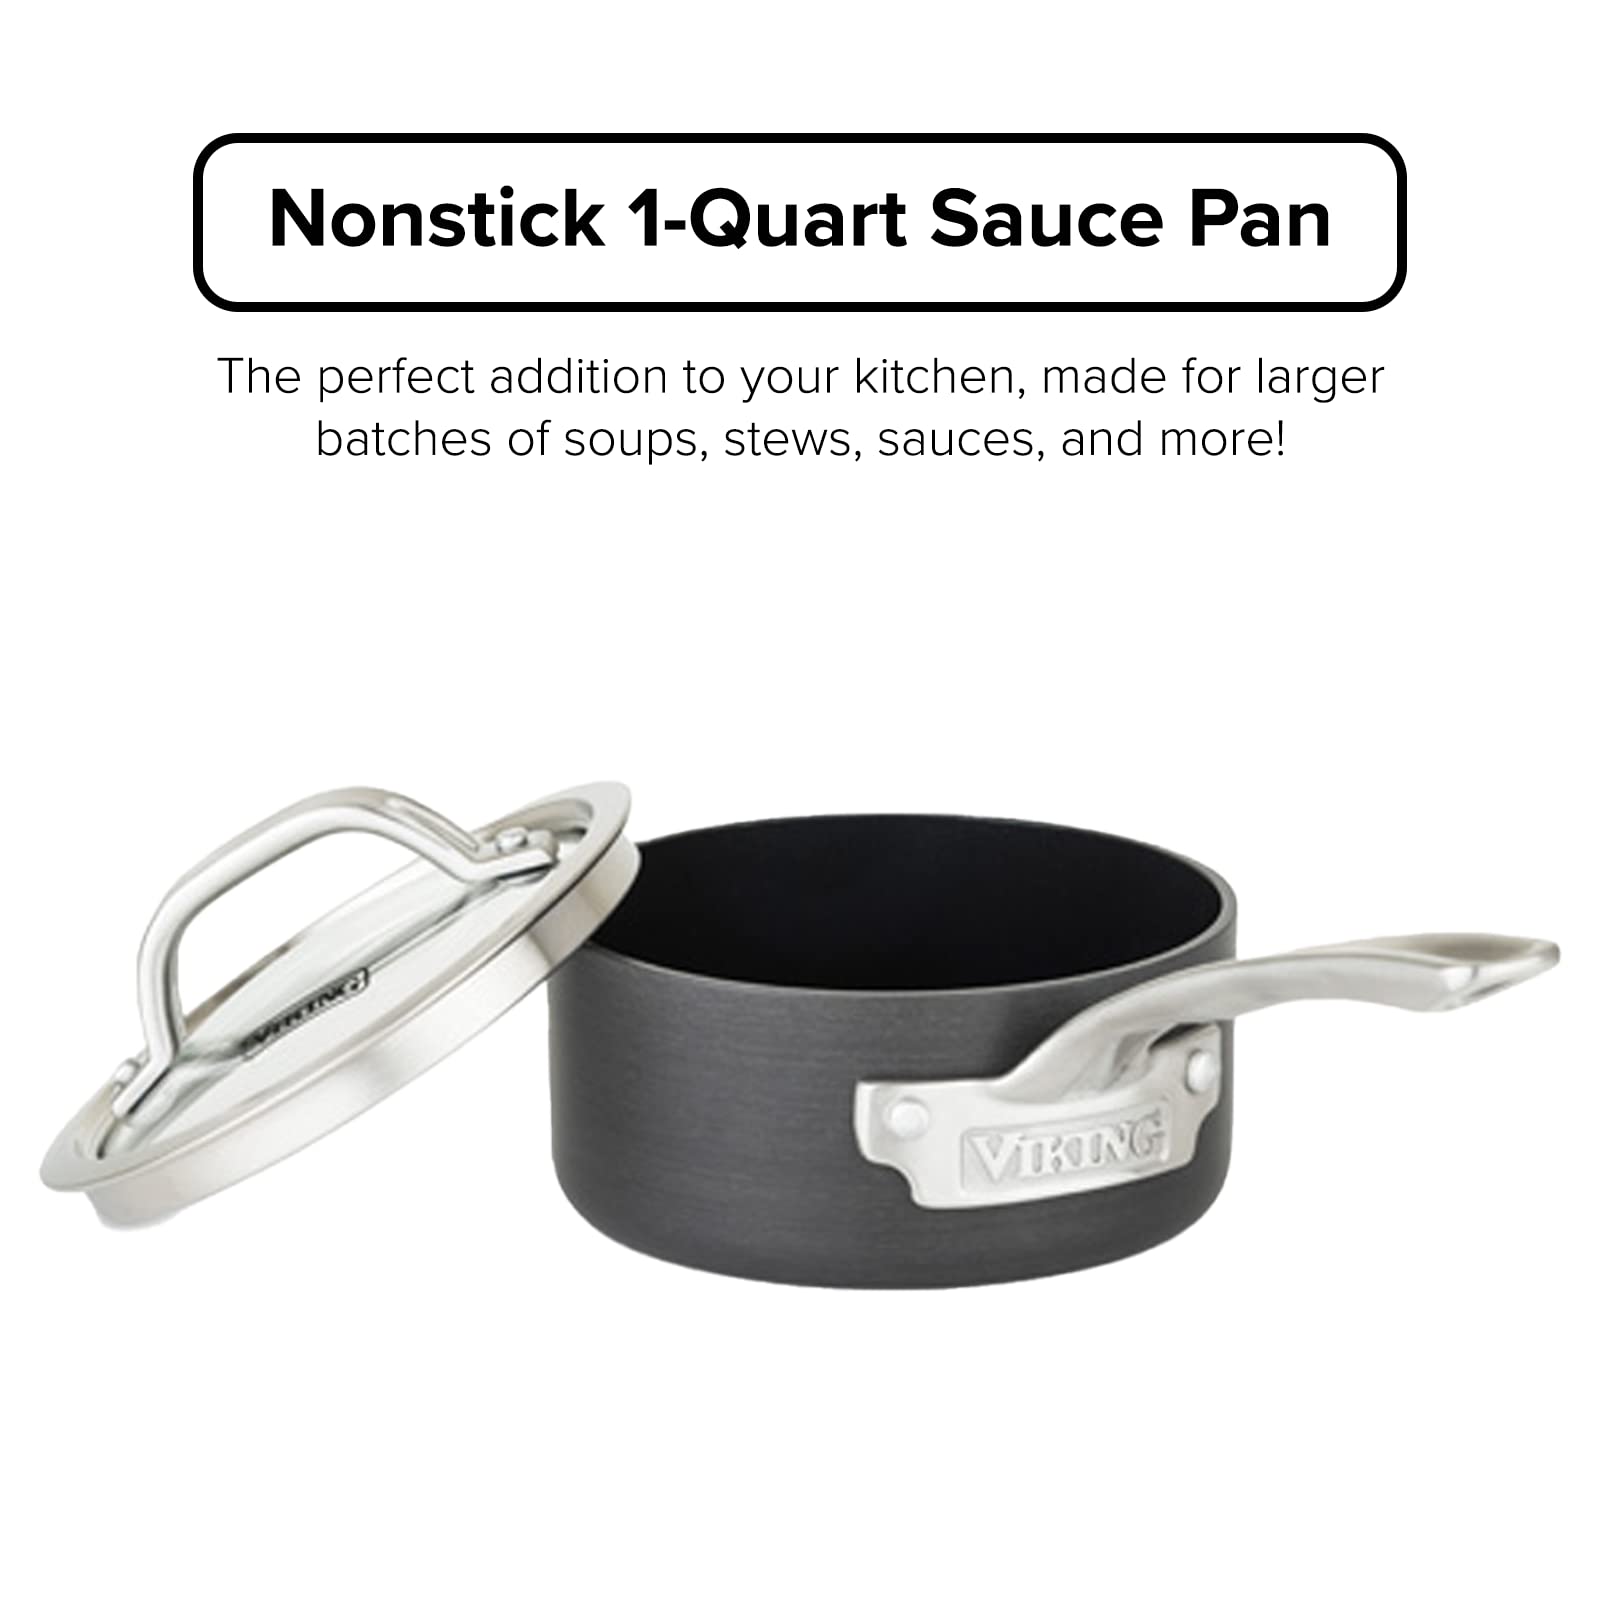 Viking Culinary Hard Anodized Nonstick Saucepan, 1 Quart, Includes Glass Lid, Oven and Dishwasher Safe, Works on Electronic, Ceramic, and Gas Cooktops